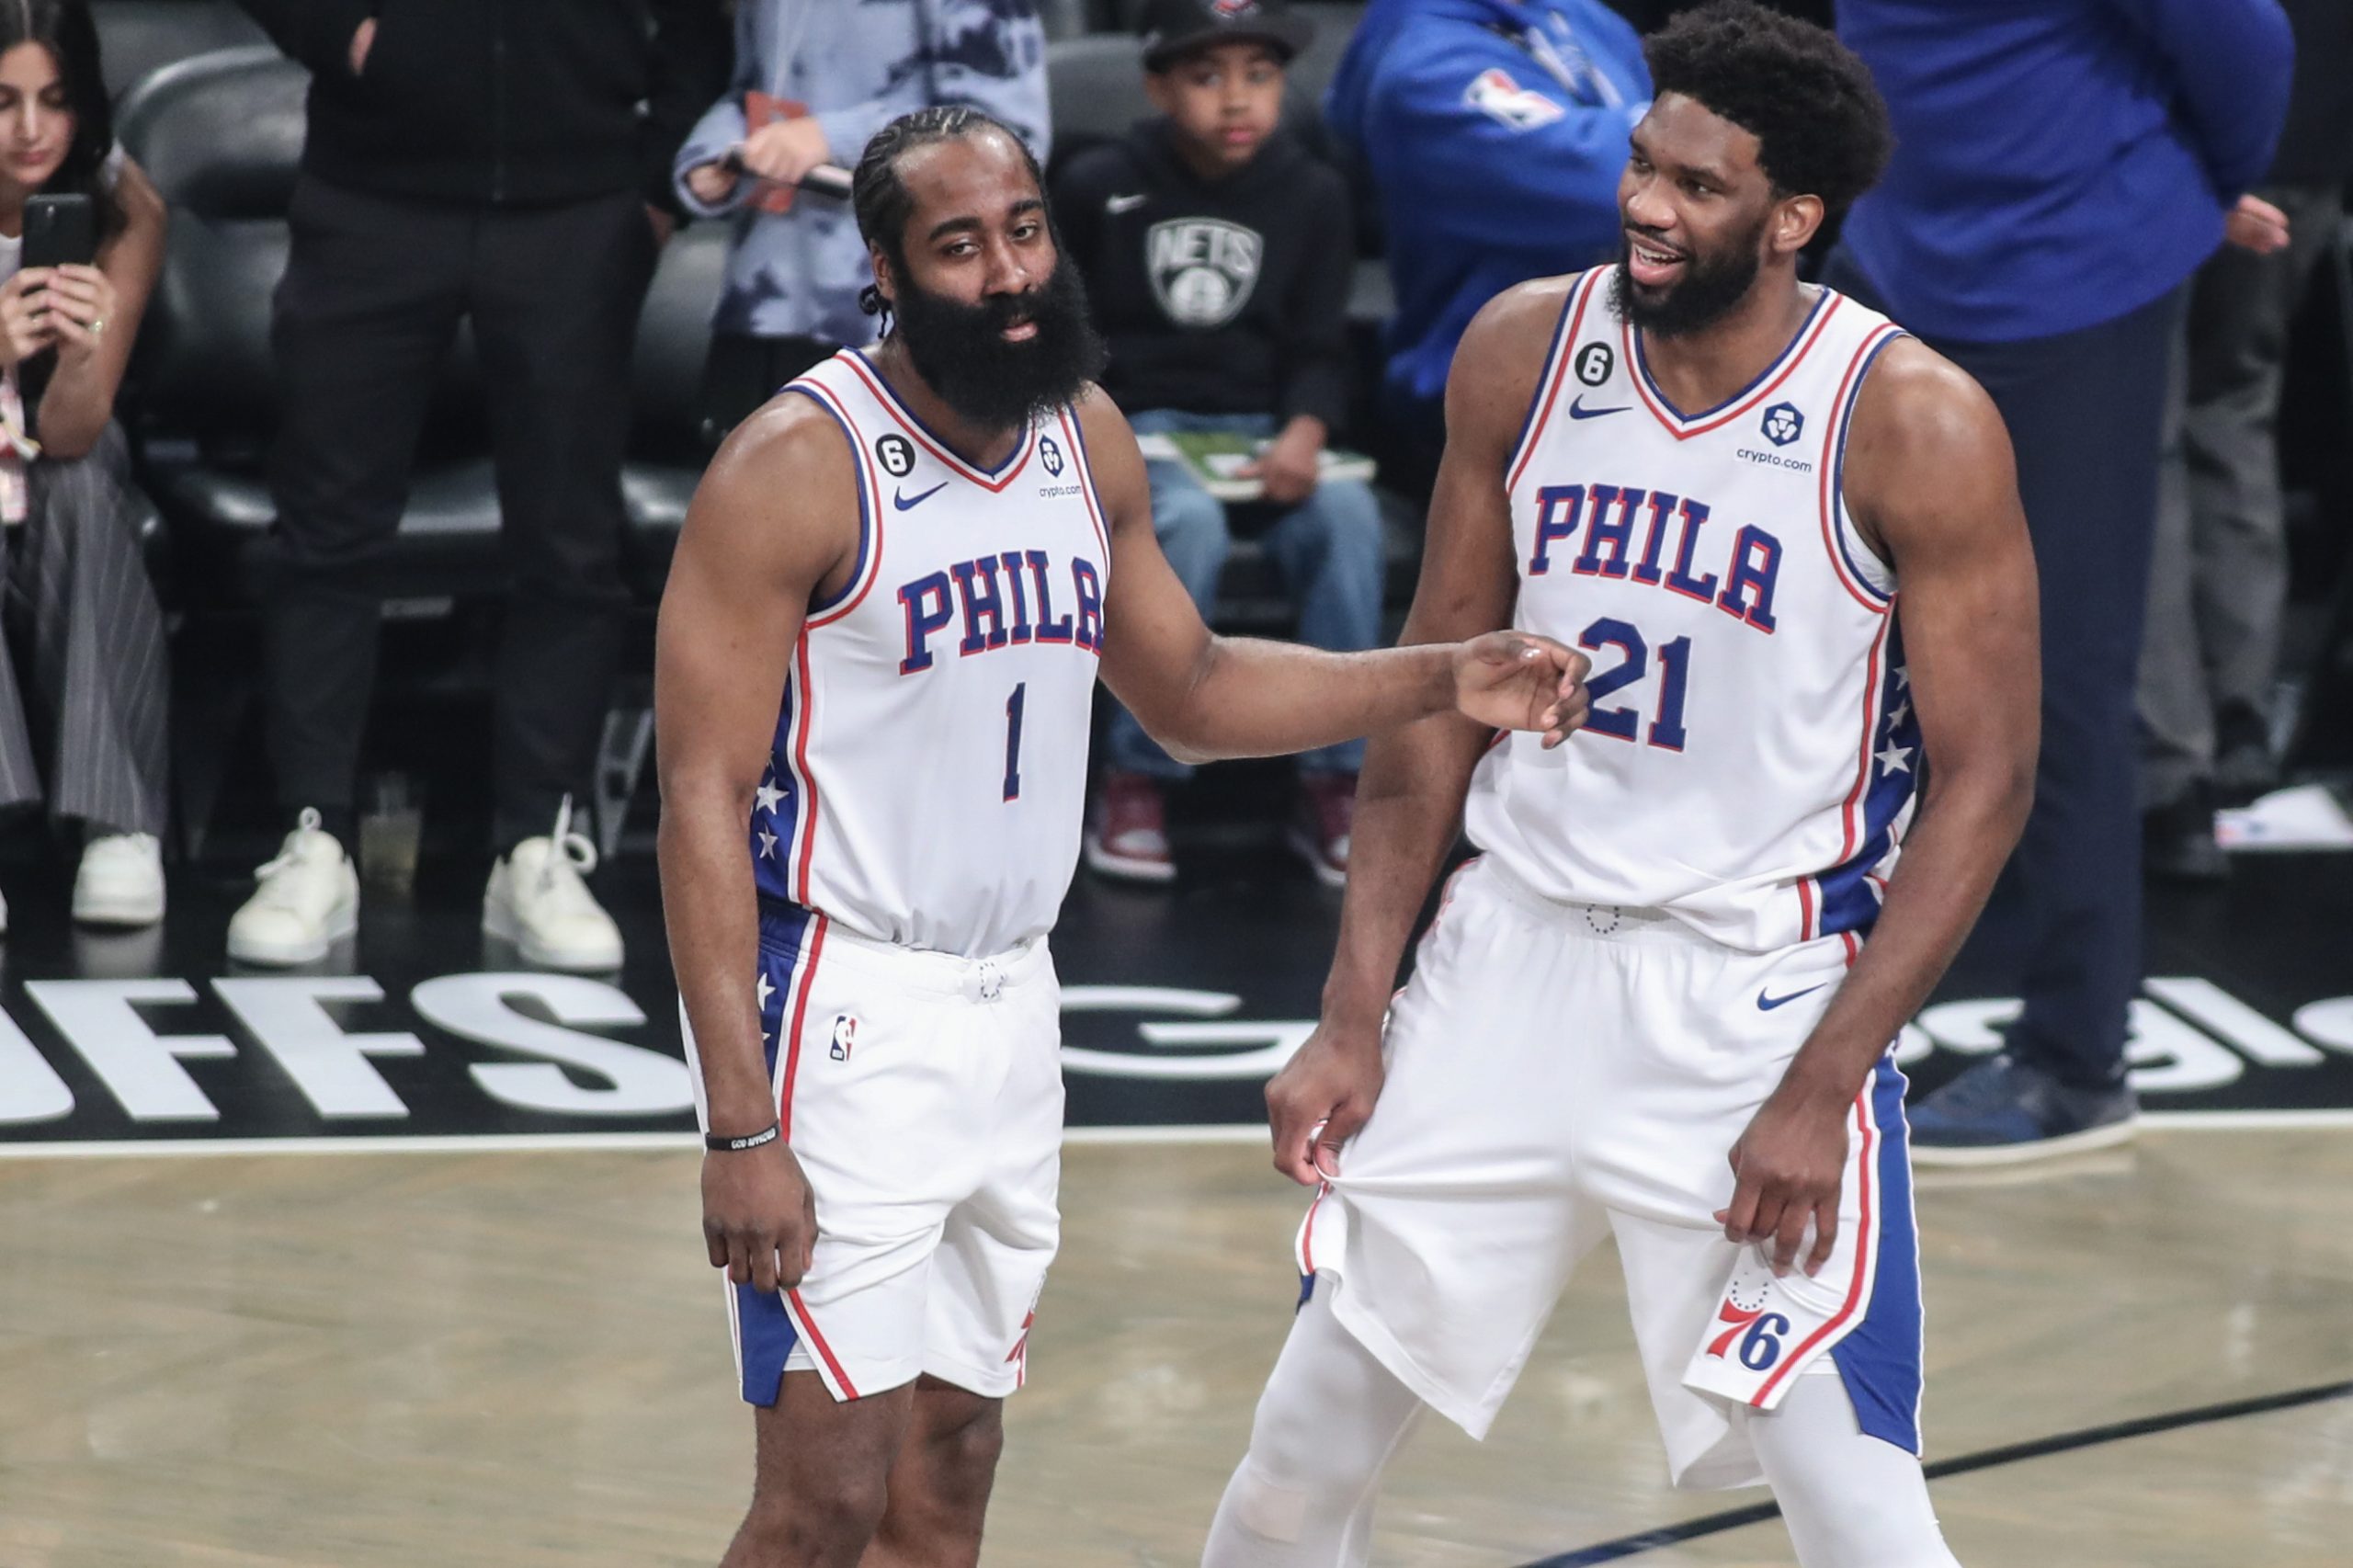 Apr 20, 2023; Brooklyn, New York, USA; Philadelphia 76ers guard James Harden (1) talks with center Joel Embiid (21) during an official’s review during game three of the 2023 NBA playoffs against the Brooklyn Nets at Barclays Center. Mandatory Credit: Wendell Cruz-USA TODAY Sports